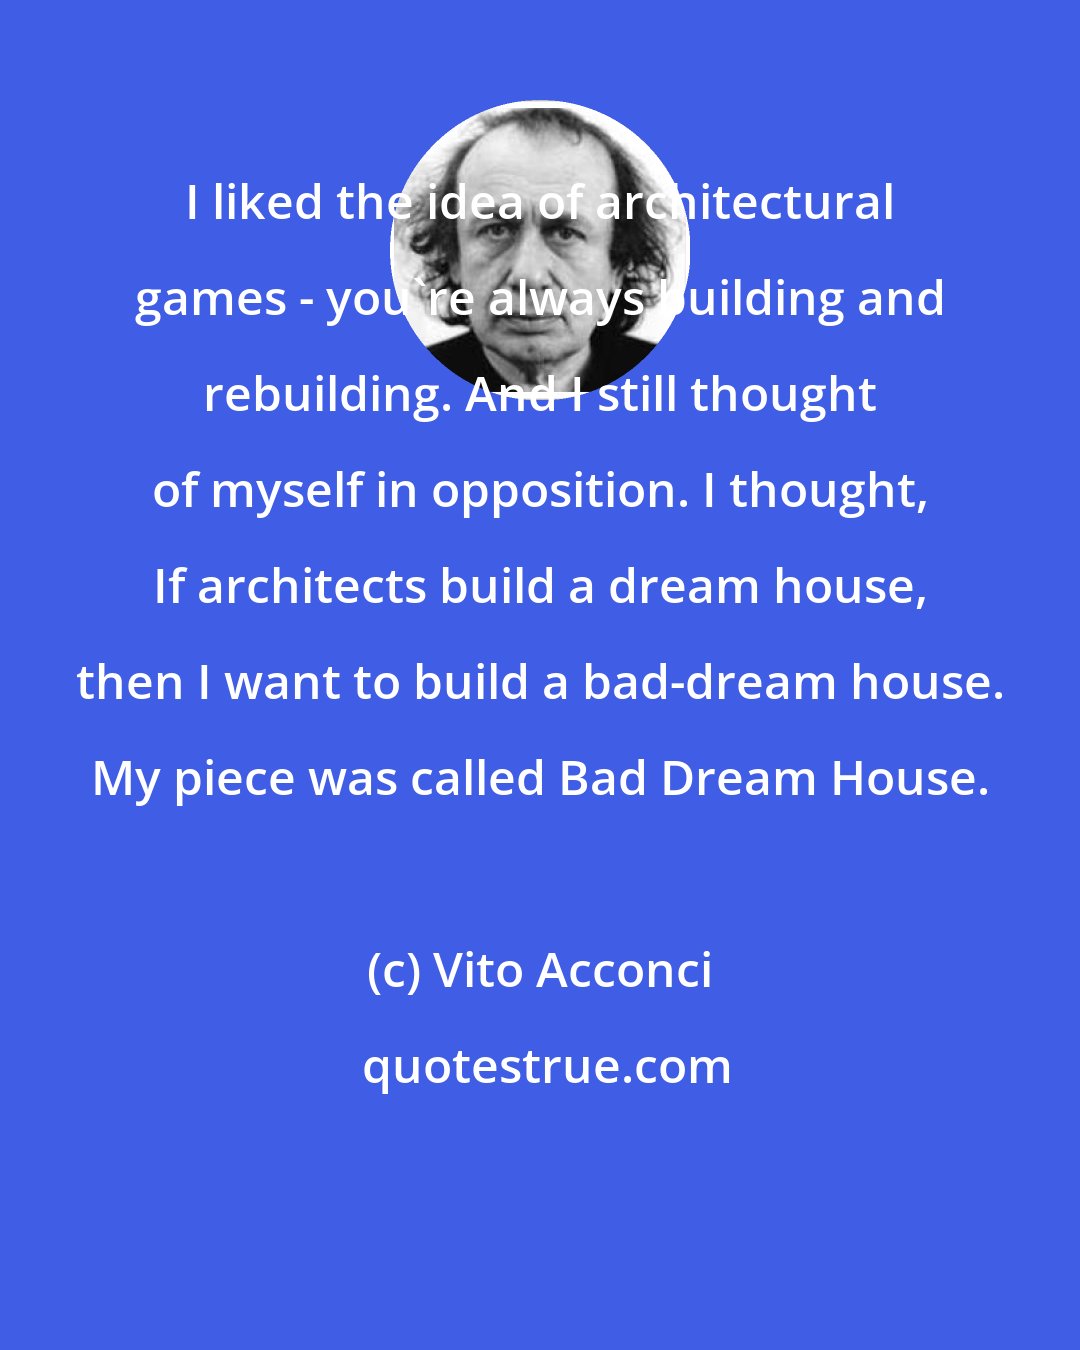 Vito Acconci: I liked the idea of architectural games - you're always building and rebuilding. And I still thought of myself in opposition. I thought, If architects build a dream house, then I want to build a bad-dream house. My piece was called Bad Dream House.